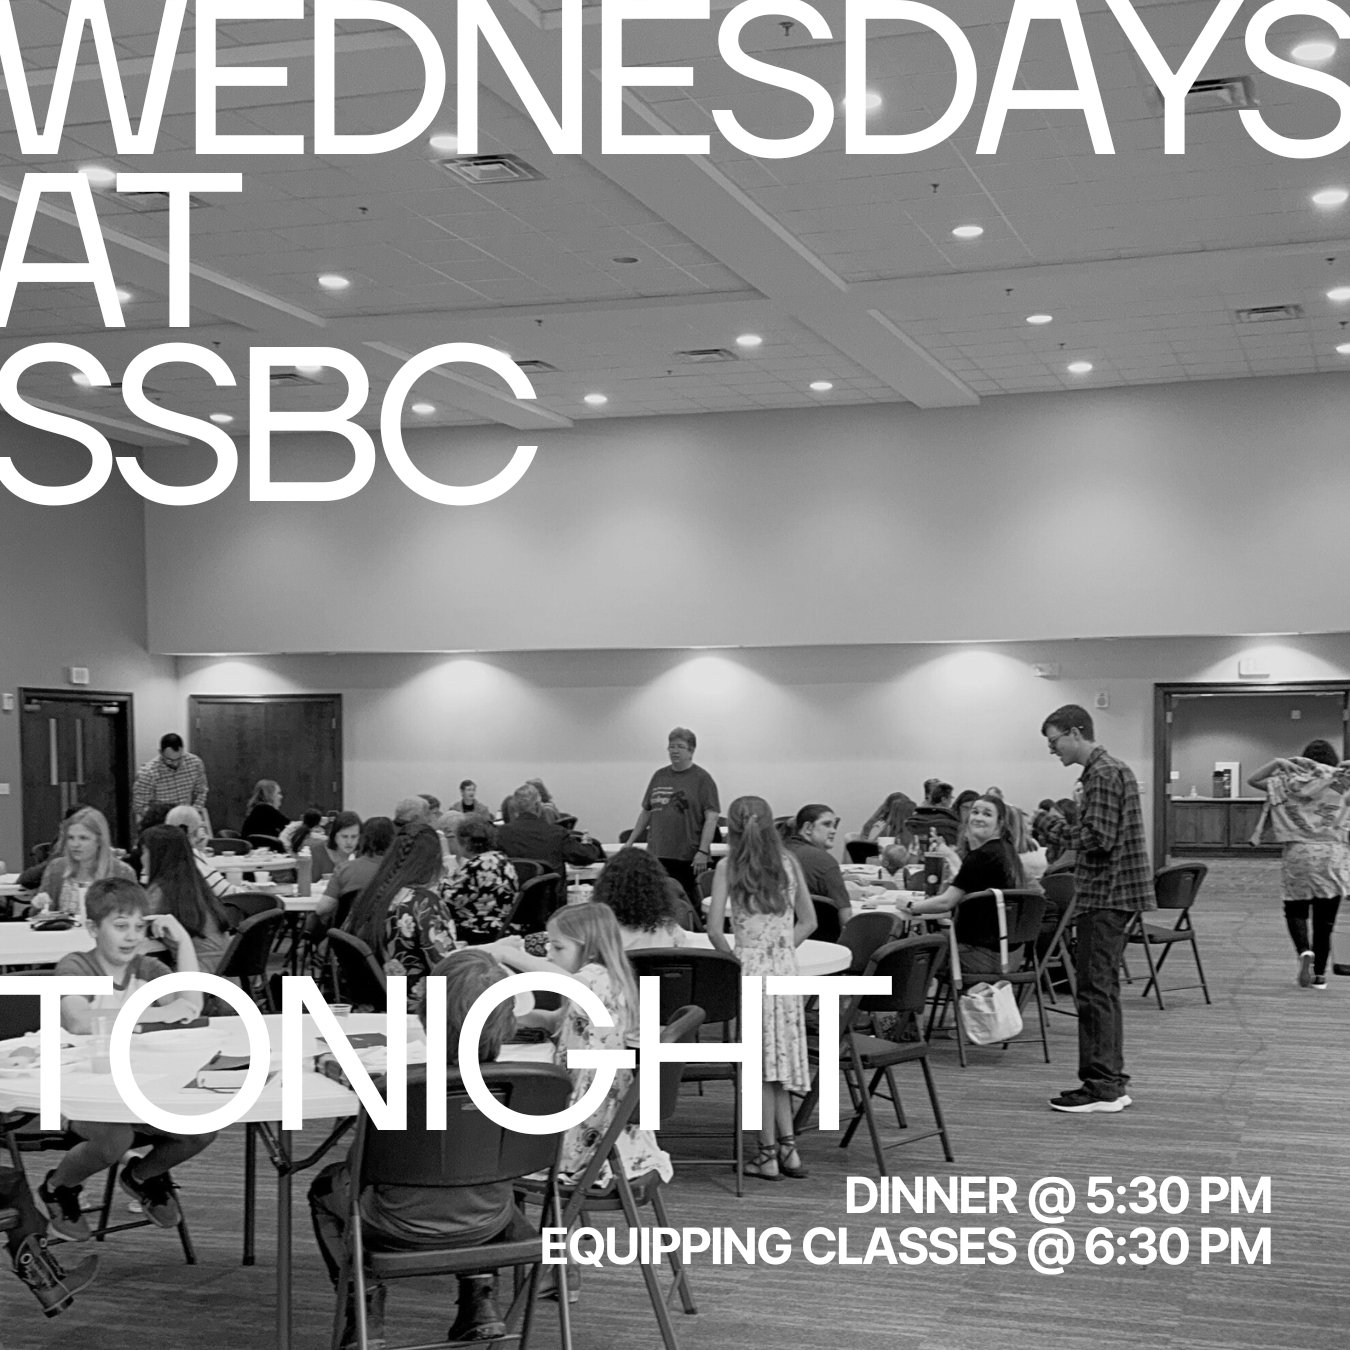 There's a place at the table for you tonight! Pause your week to connect with Church family and the Lord! Dinner is at 5:30 followed by equipping classes, kids, and youth at 6:30. See you soon!